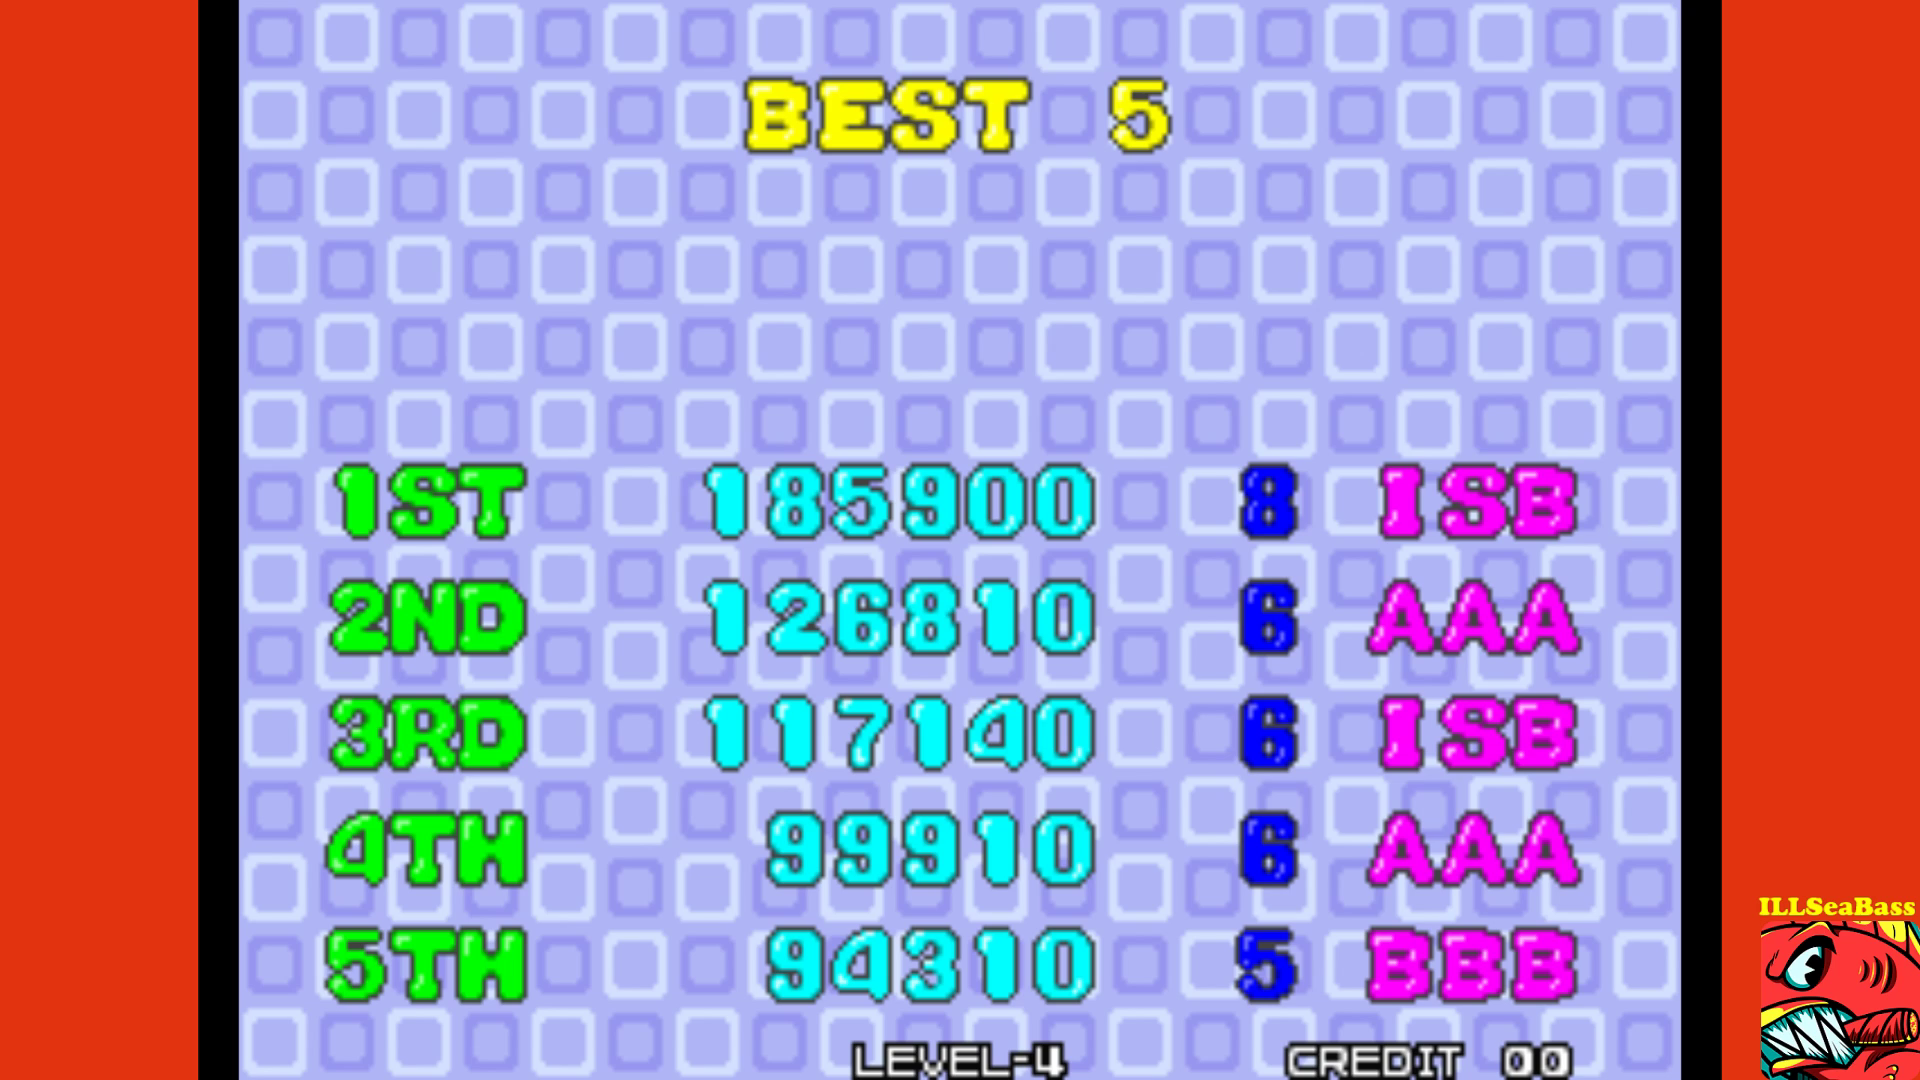 ILLSeaBass: Puzzle Bobble / Bust-A-Move [pbobblen] (Arcade Emulated / M.A.M.E.) 185,900 points on 2017-09-18 20:14:45